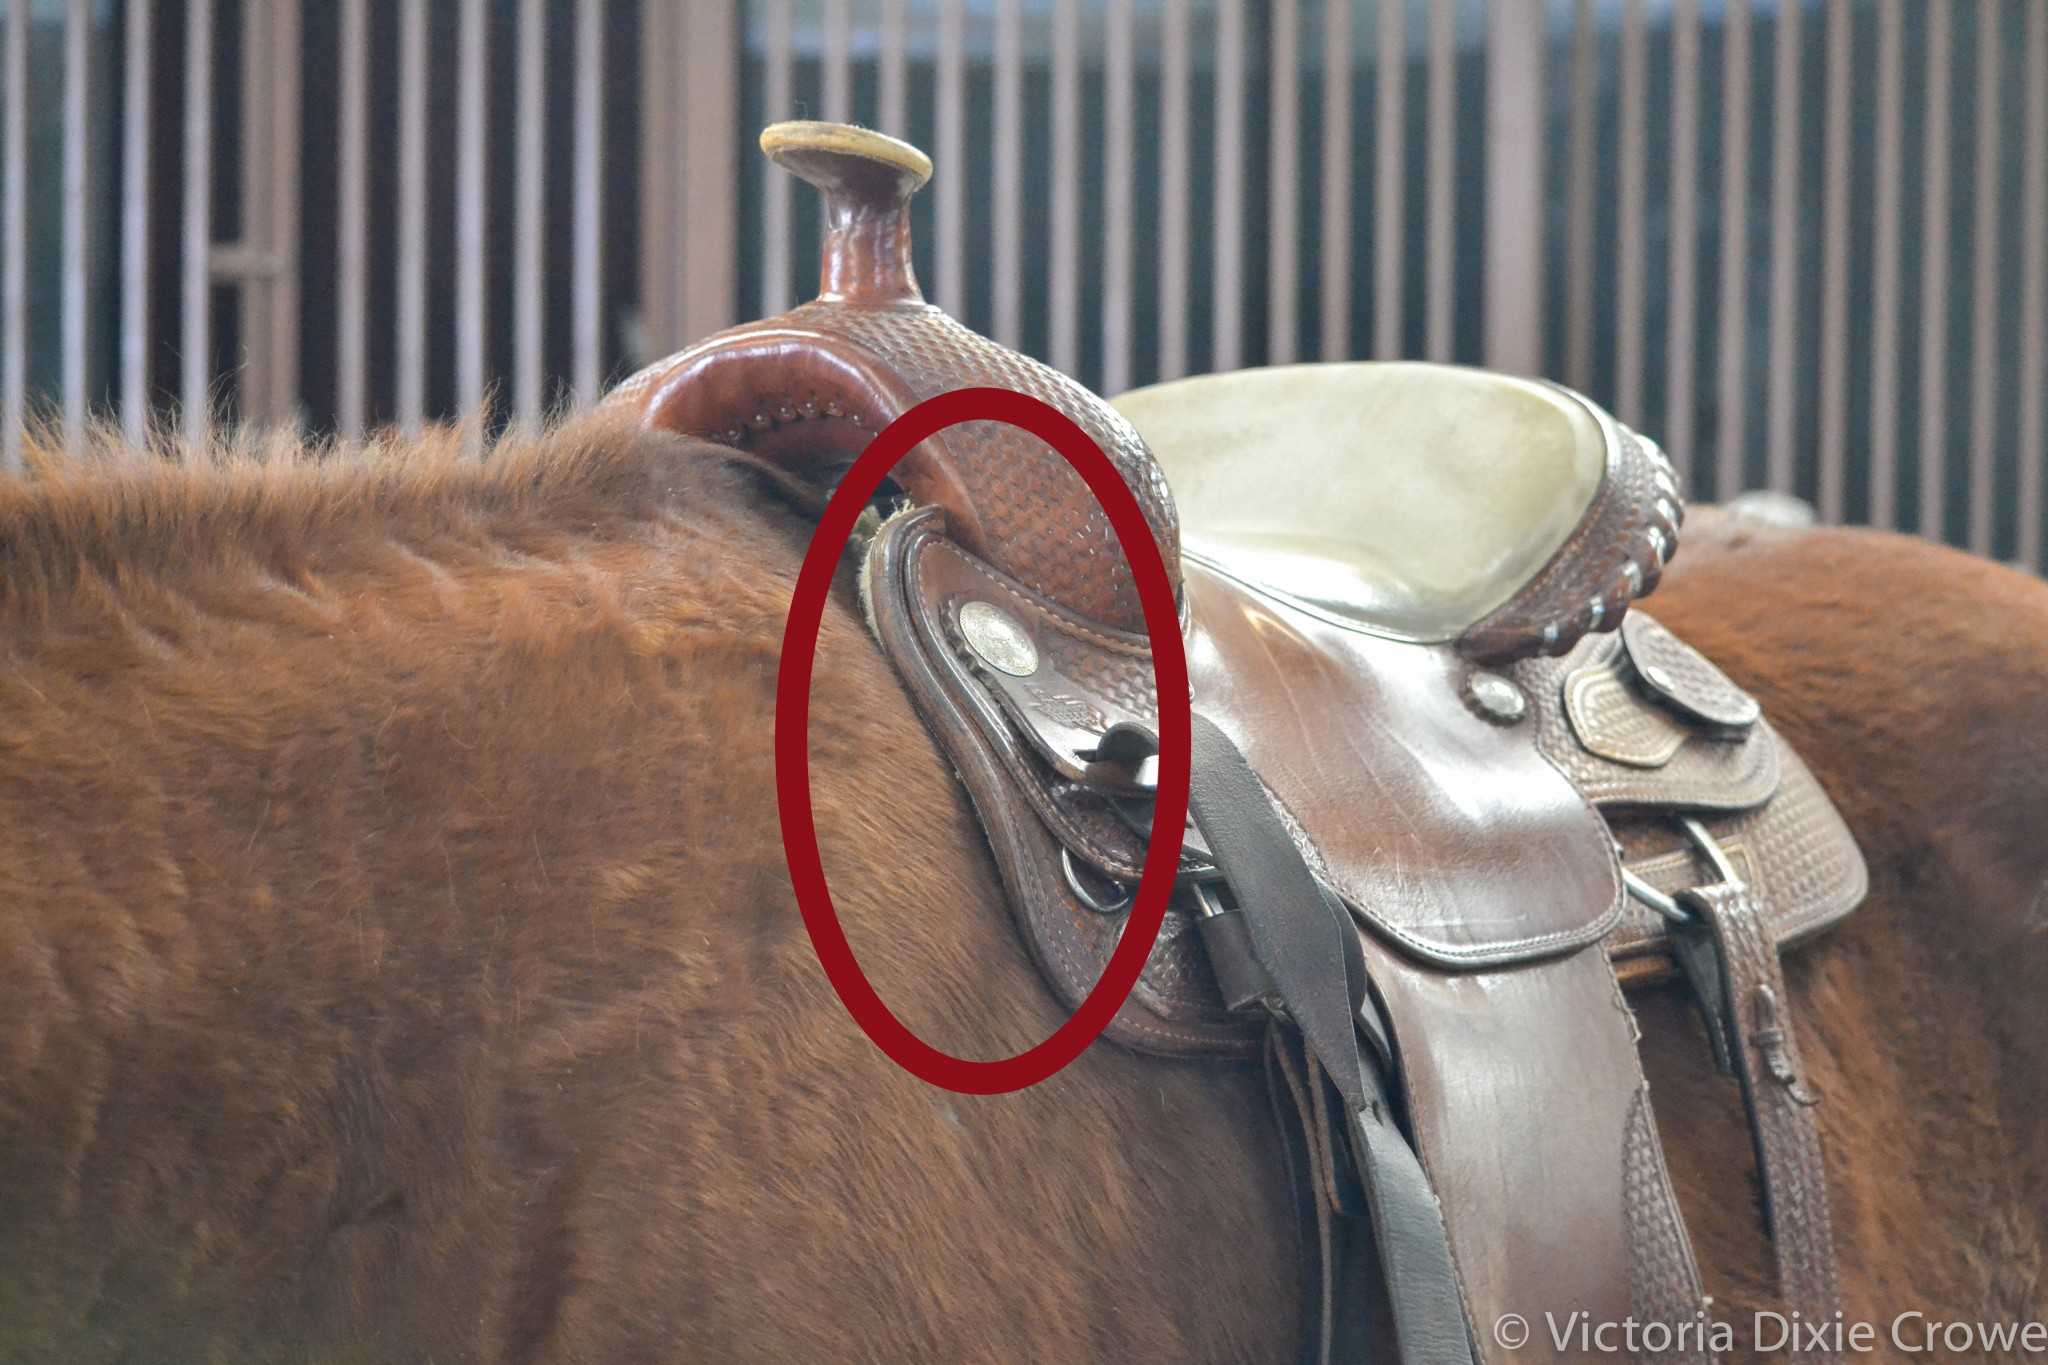 The beginning of the bar of my saddle is just under the silver concho, and you can see it is too tight on this horse. Photo credit Dixie Crowe